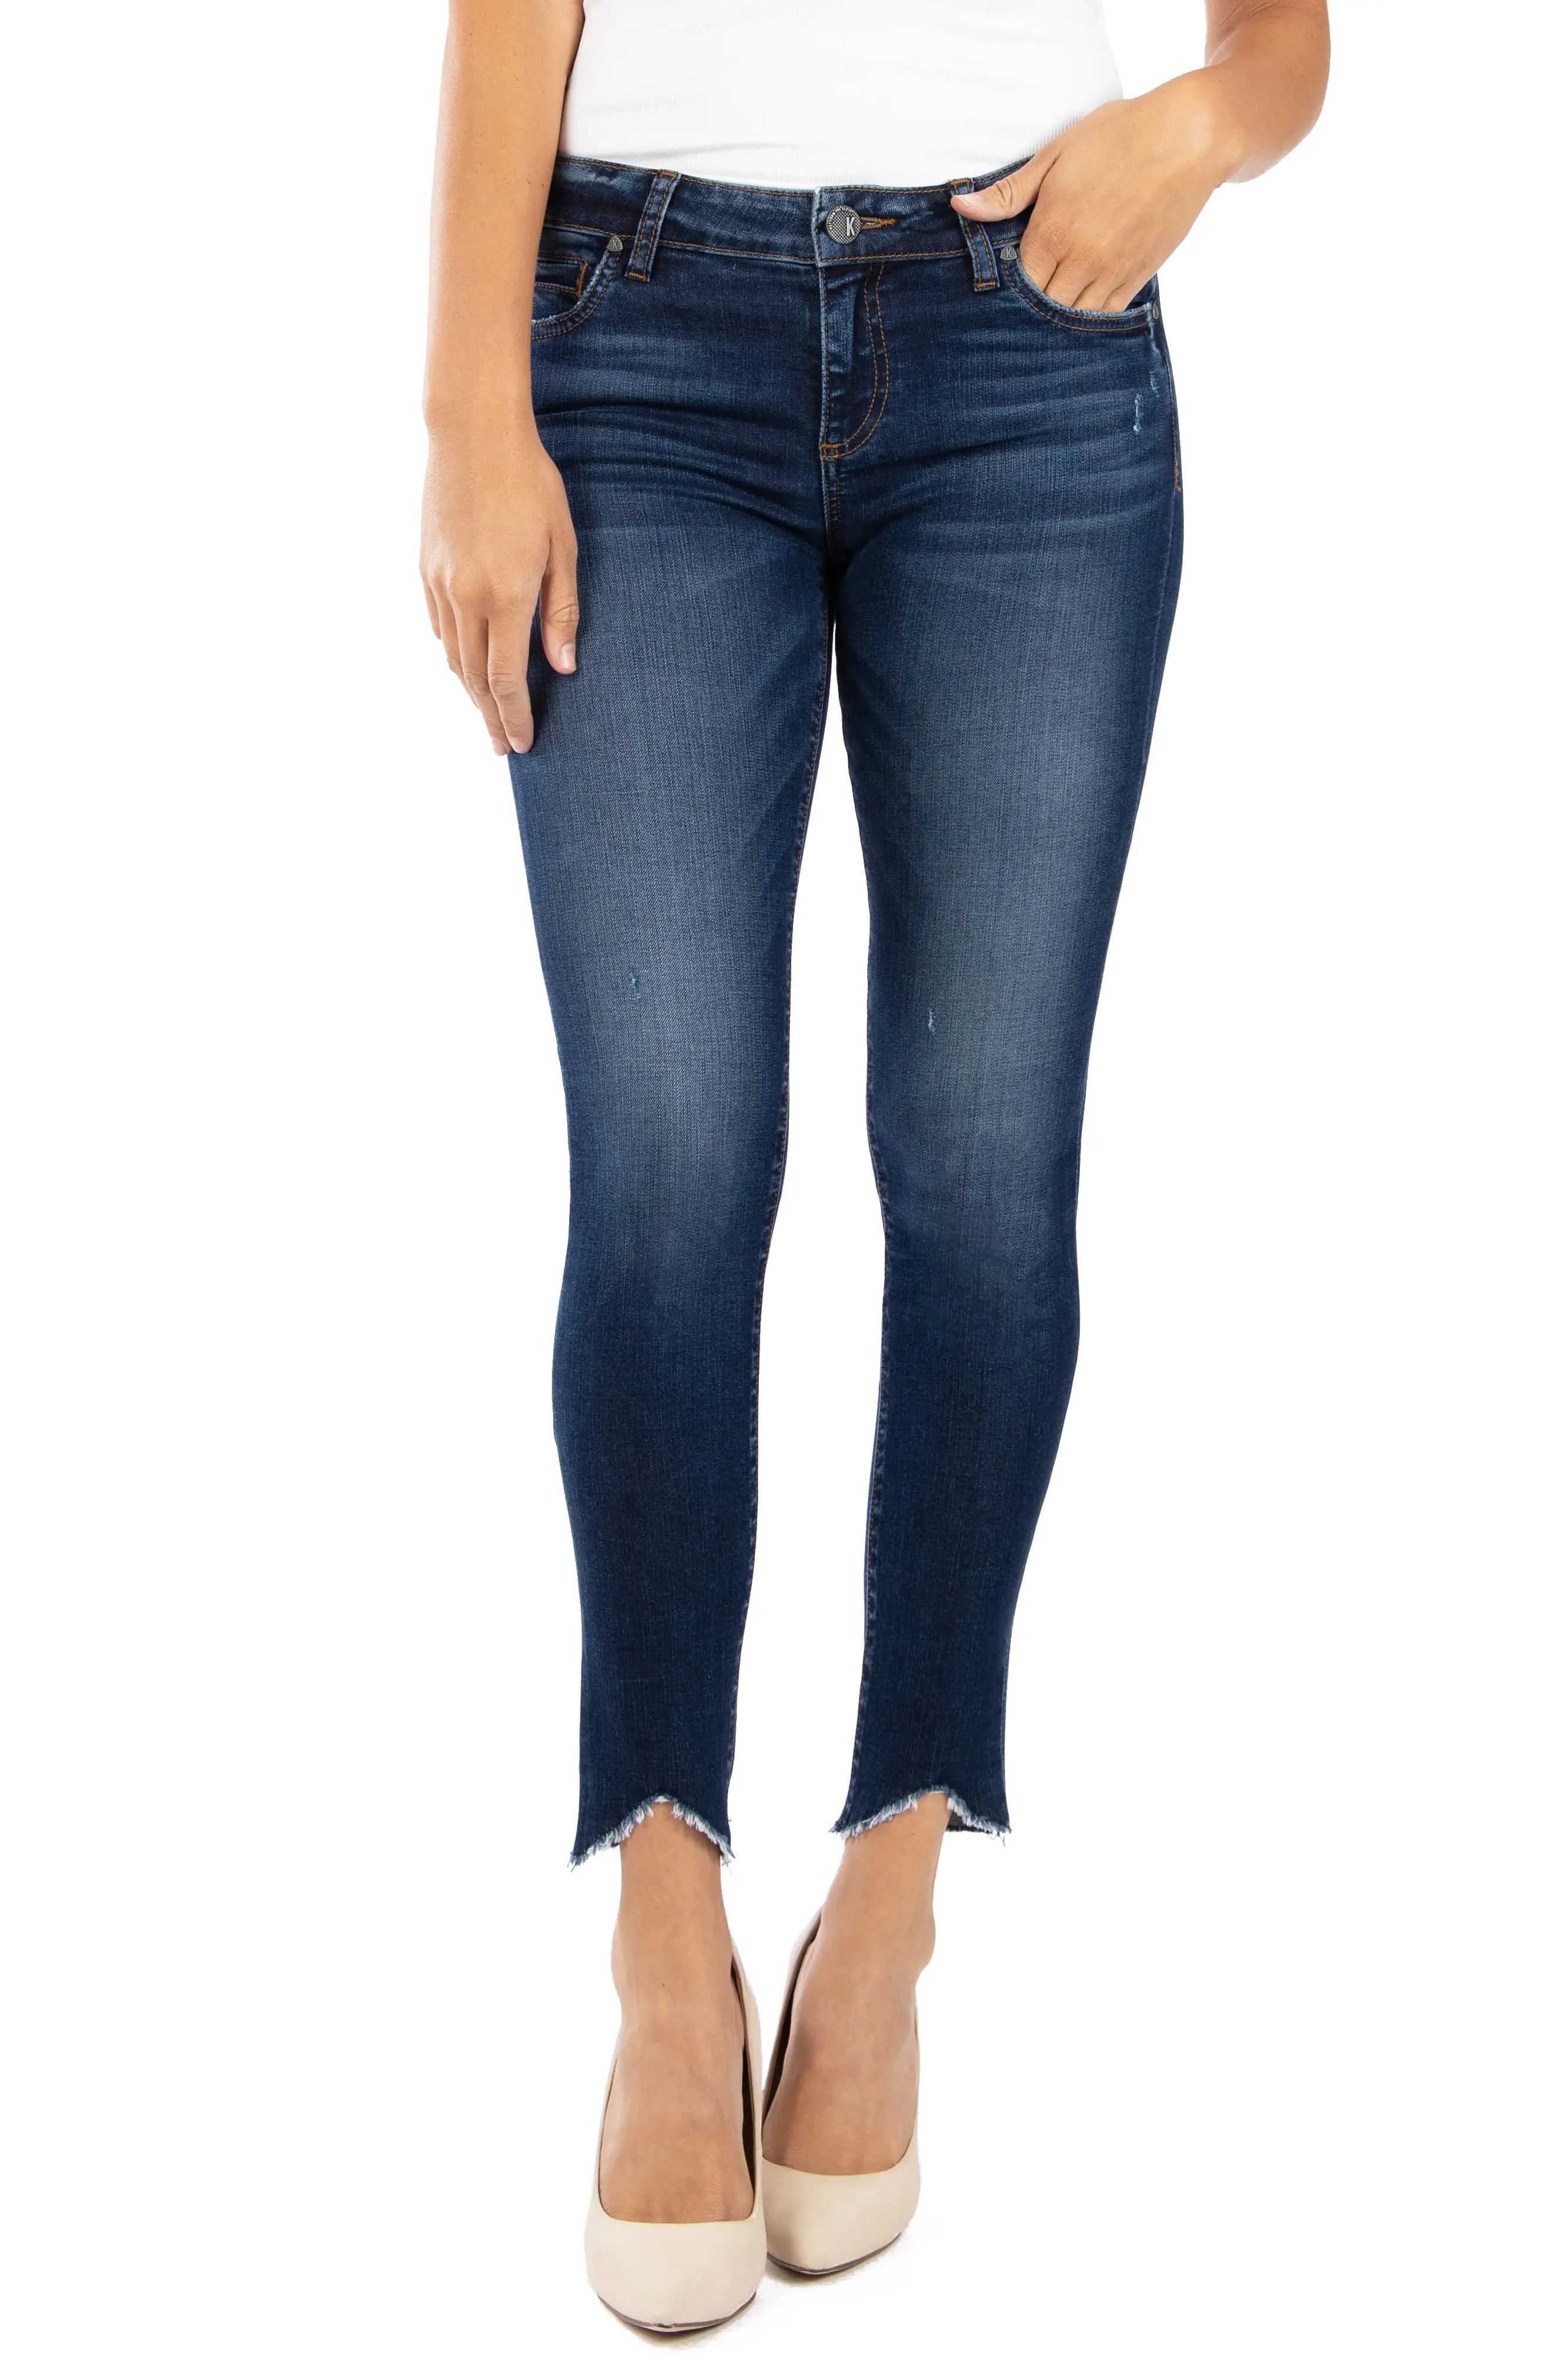 KUT from the Kloth Connie Raw Angled Hem Ankle Skinny Jeans in Taste at Nordstrom, Size 10 | Nordstrom